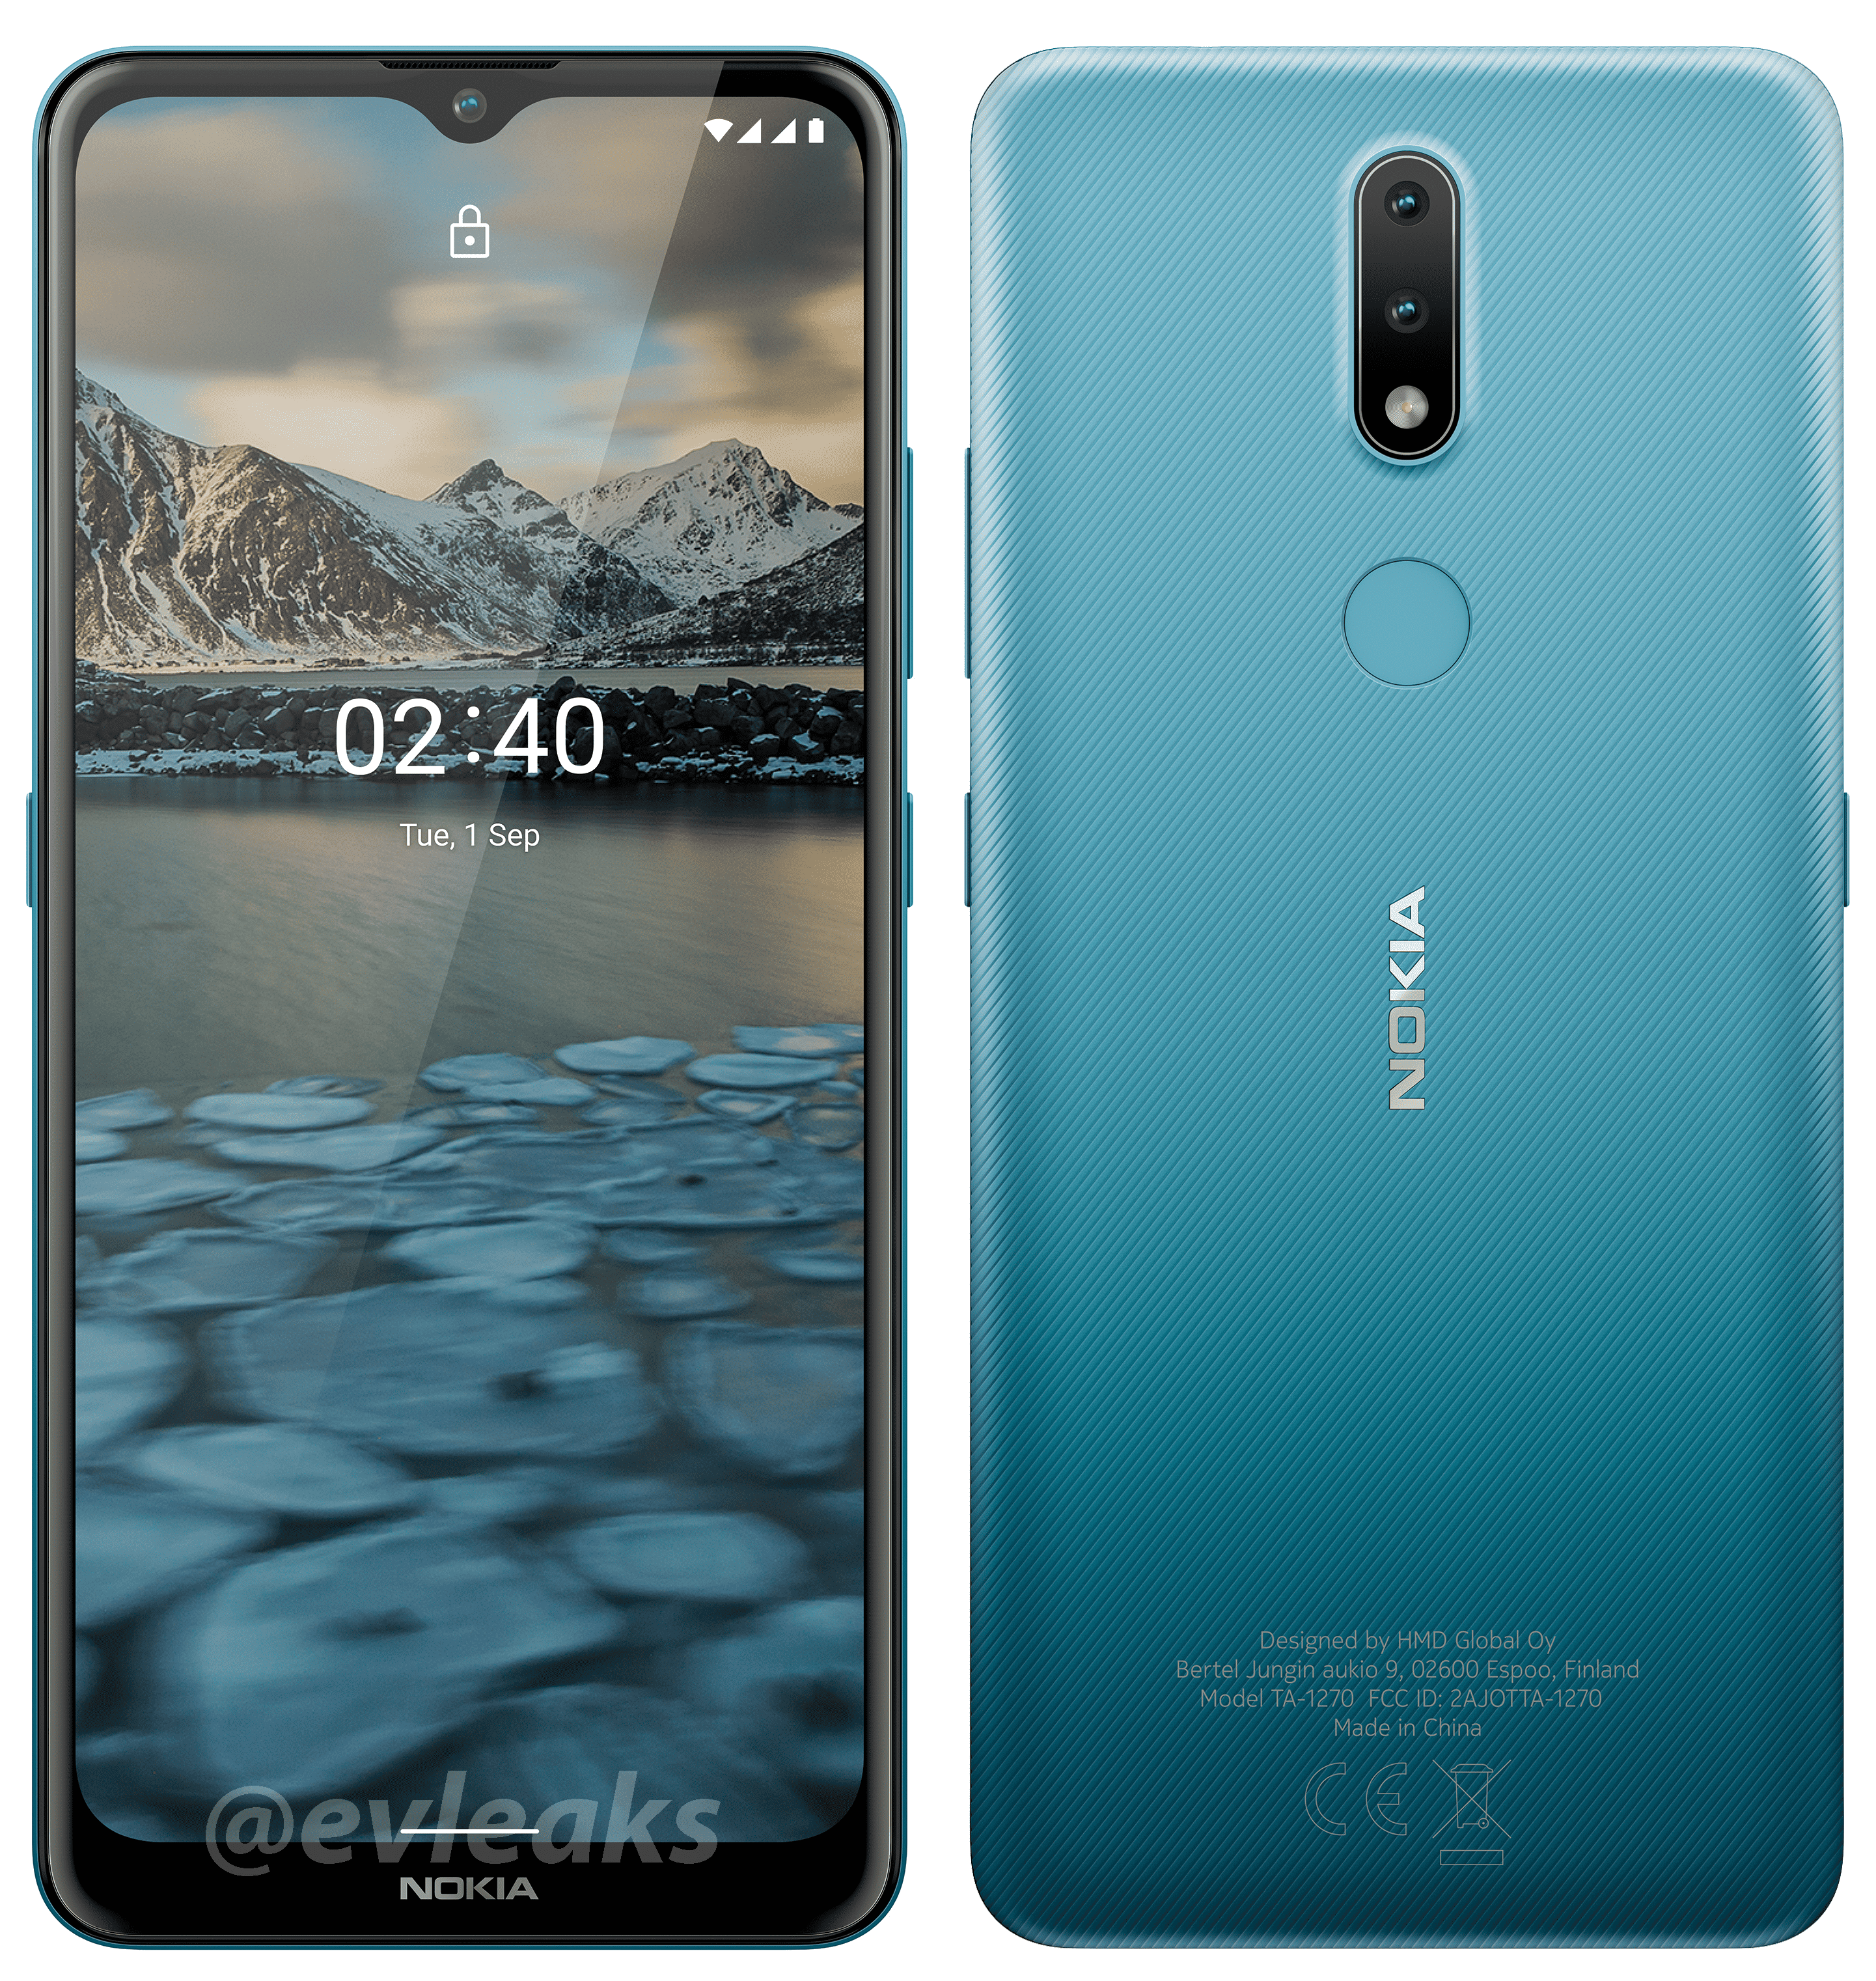 A closer look at HMD’s upcoming Nokia 2.4 smartphone